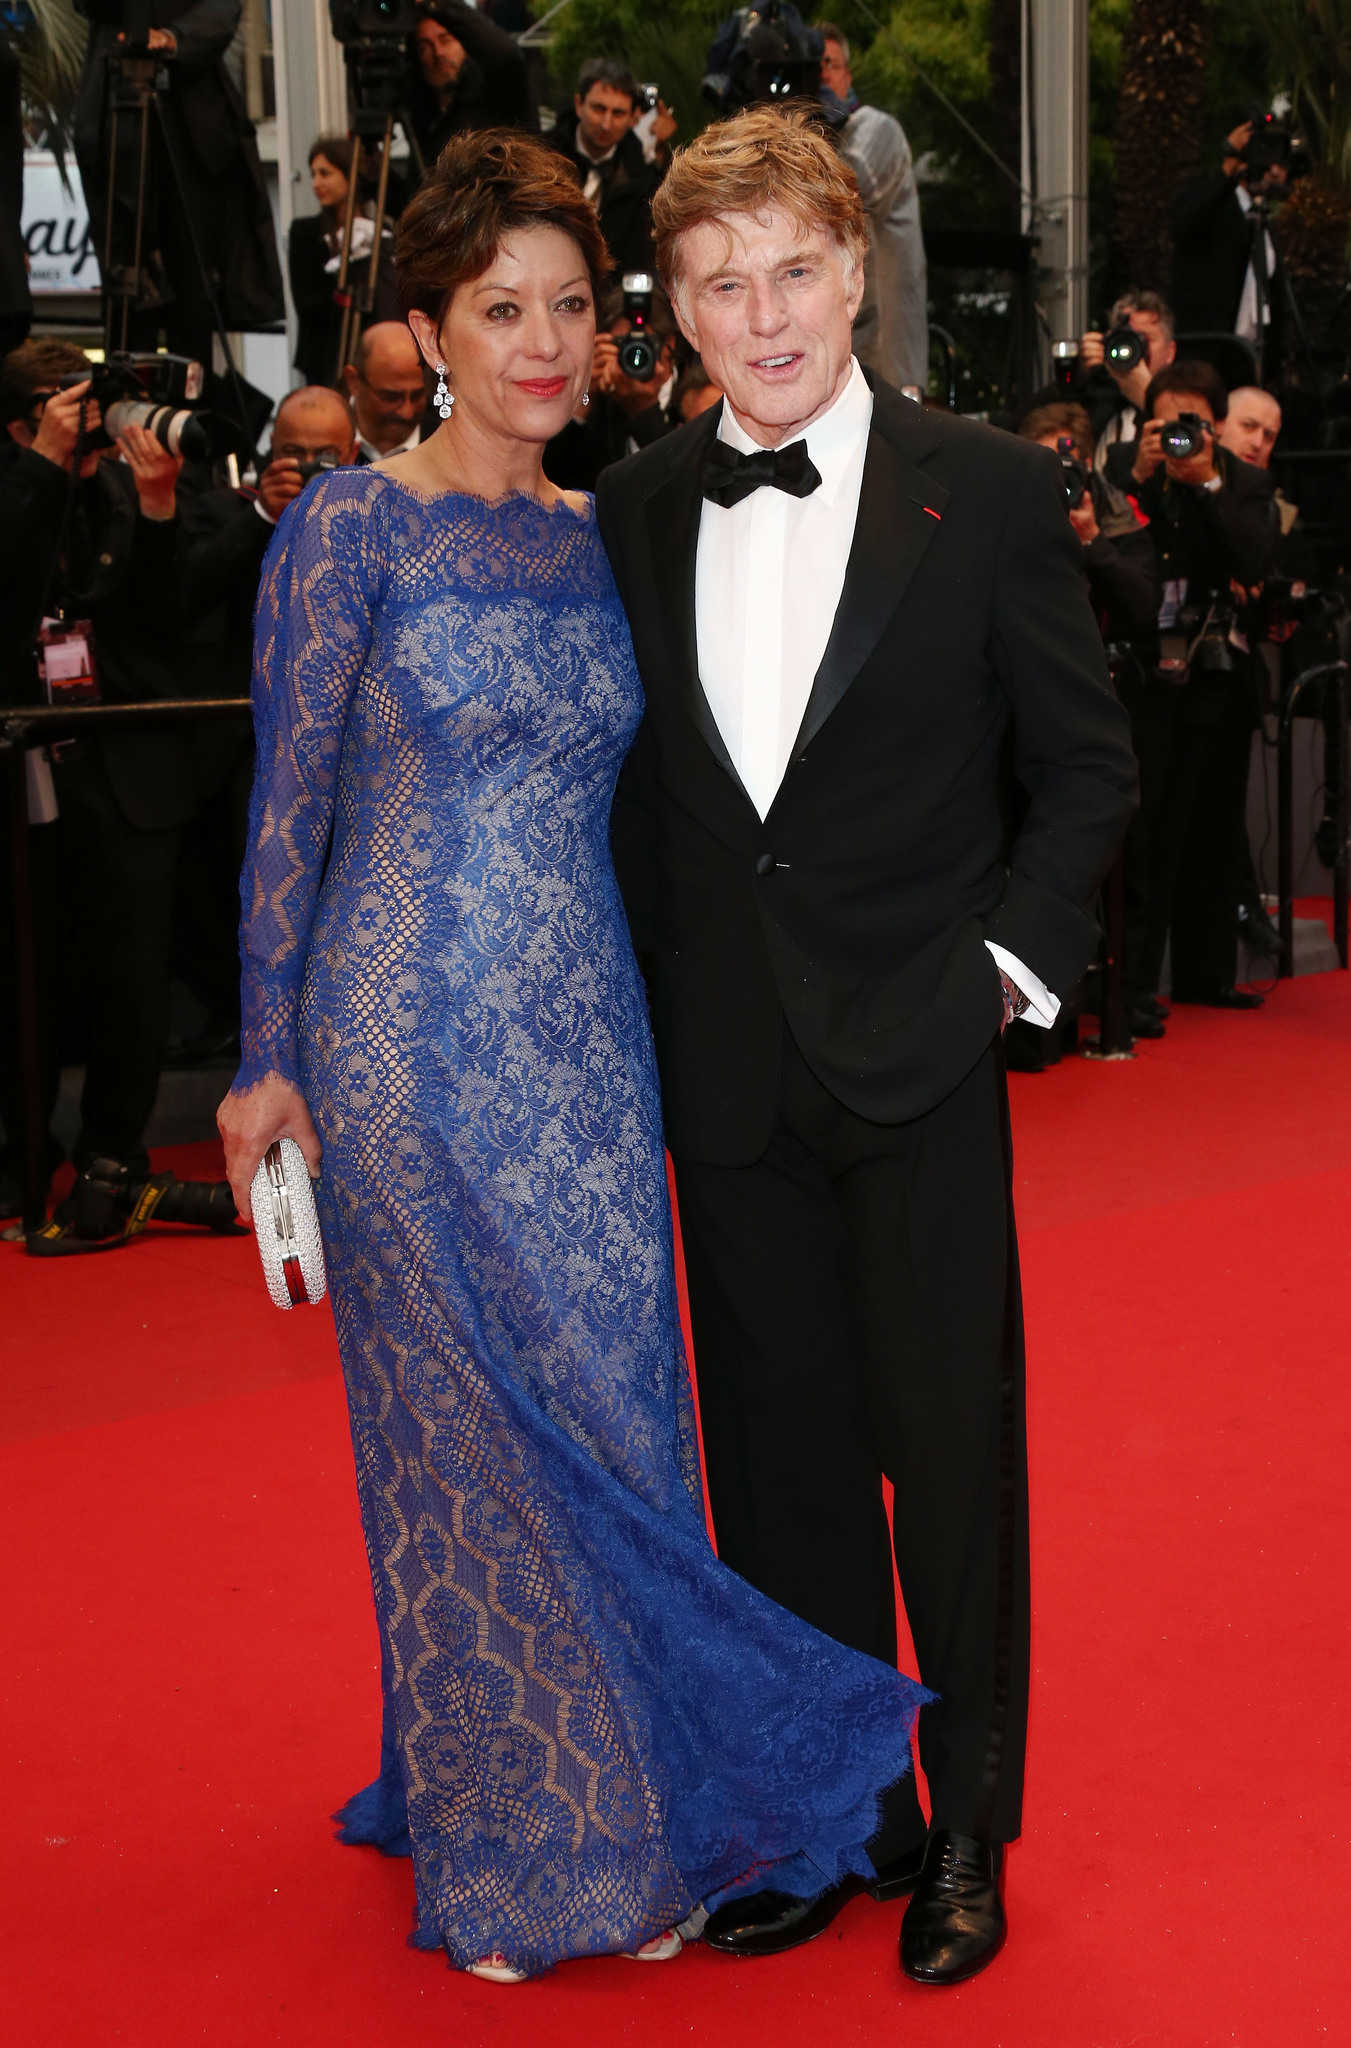 Actor Robert Redford (R) and his wife Sibylle Szaggars attend the 'All Is Lost' Premiere during the 66th Annual Cannes Film Festival at Palais des Festivals on May 22, 2013 in Cannes, France.